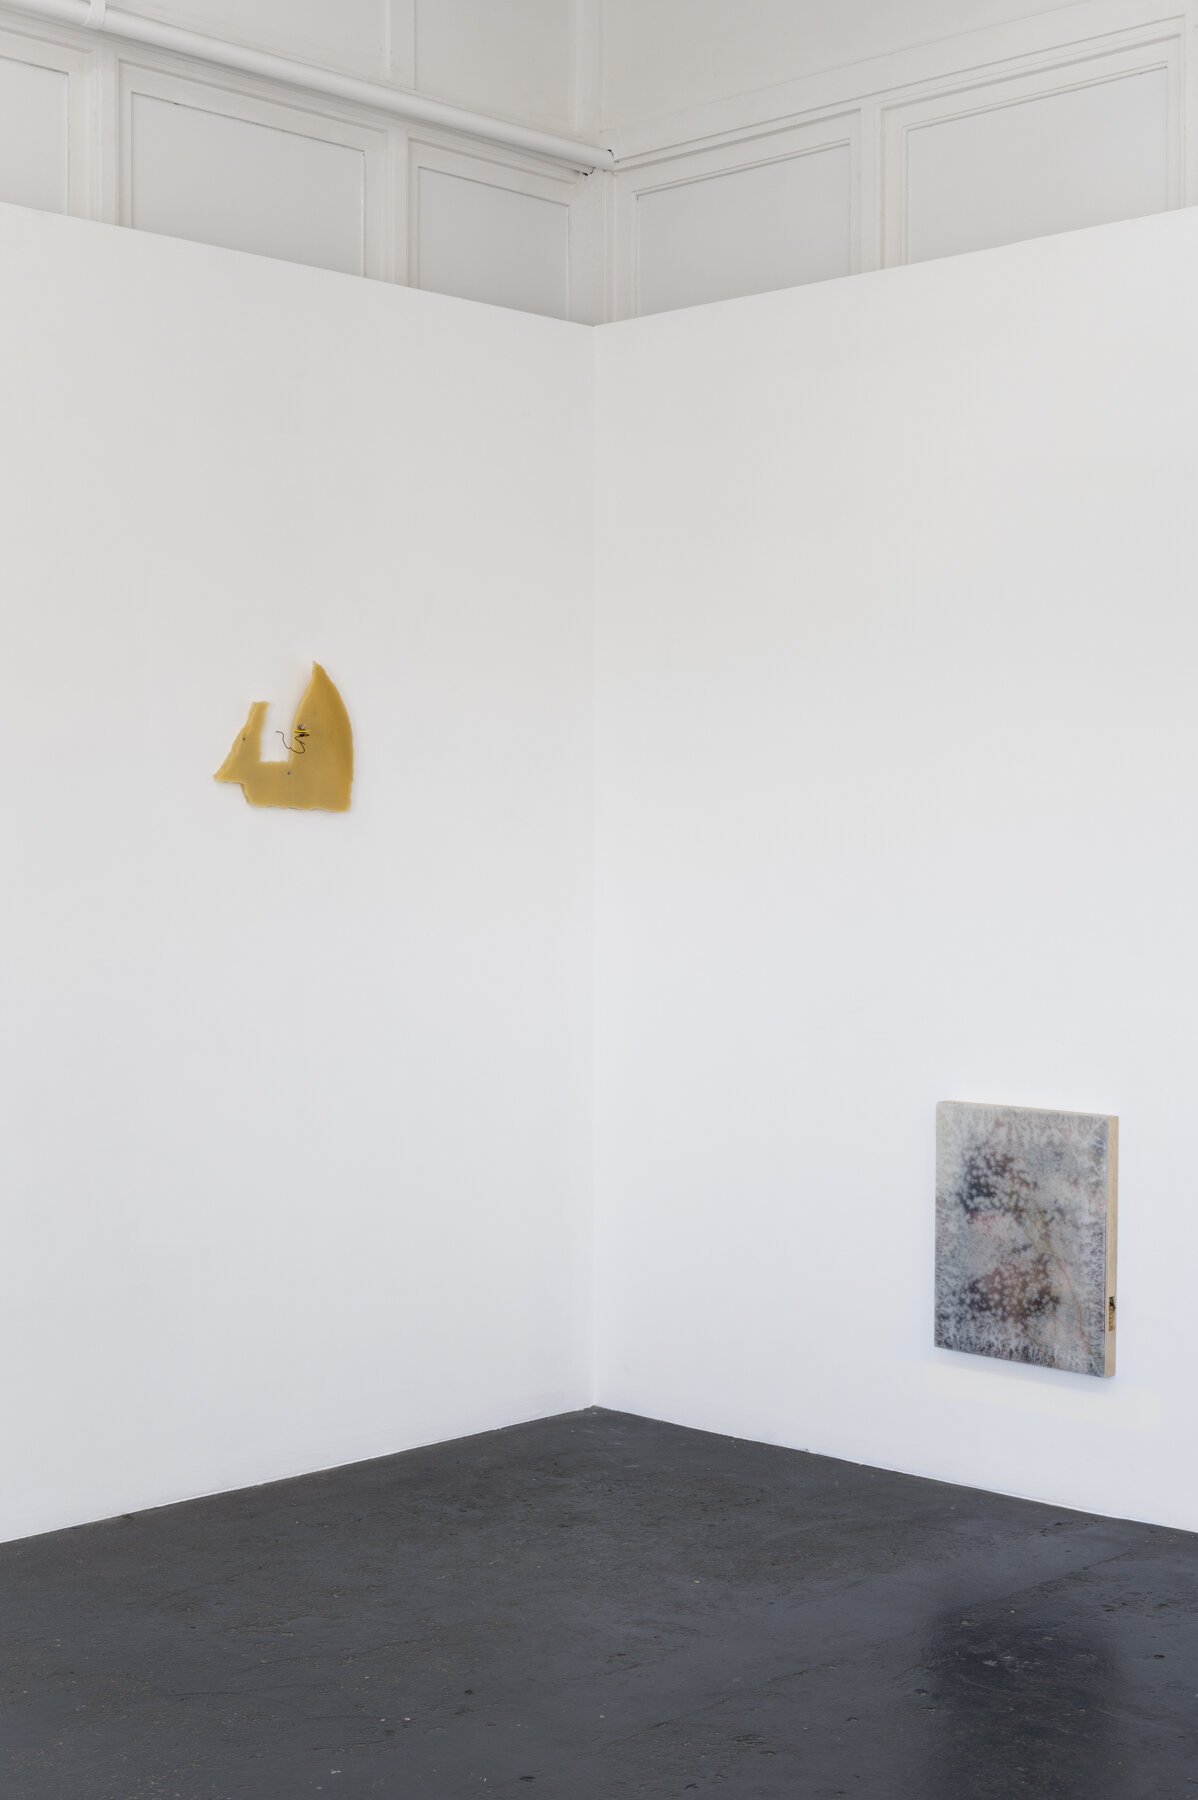   Installation view   Pictured (from left to right): Madeleine Minack, Kaijern Koo.  Image courtesy of Aaron Christopher Rees. 